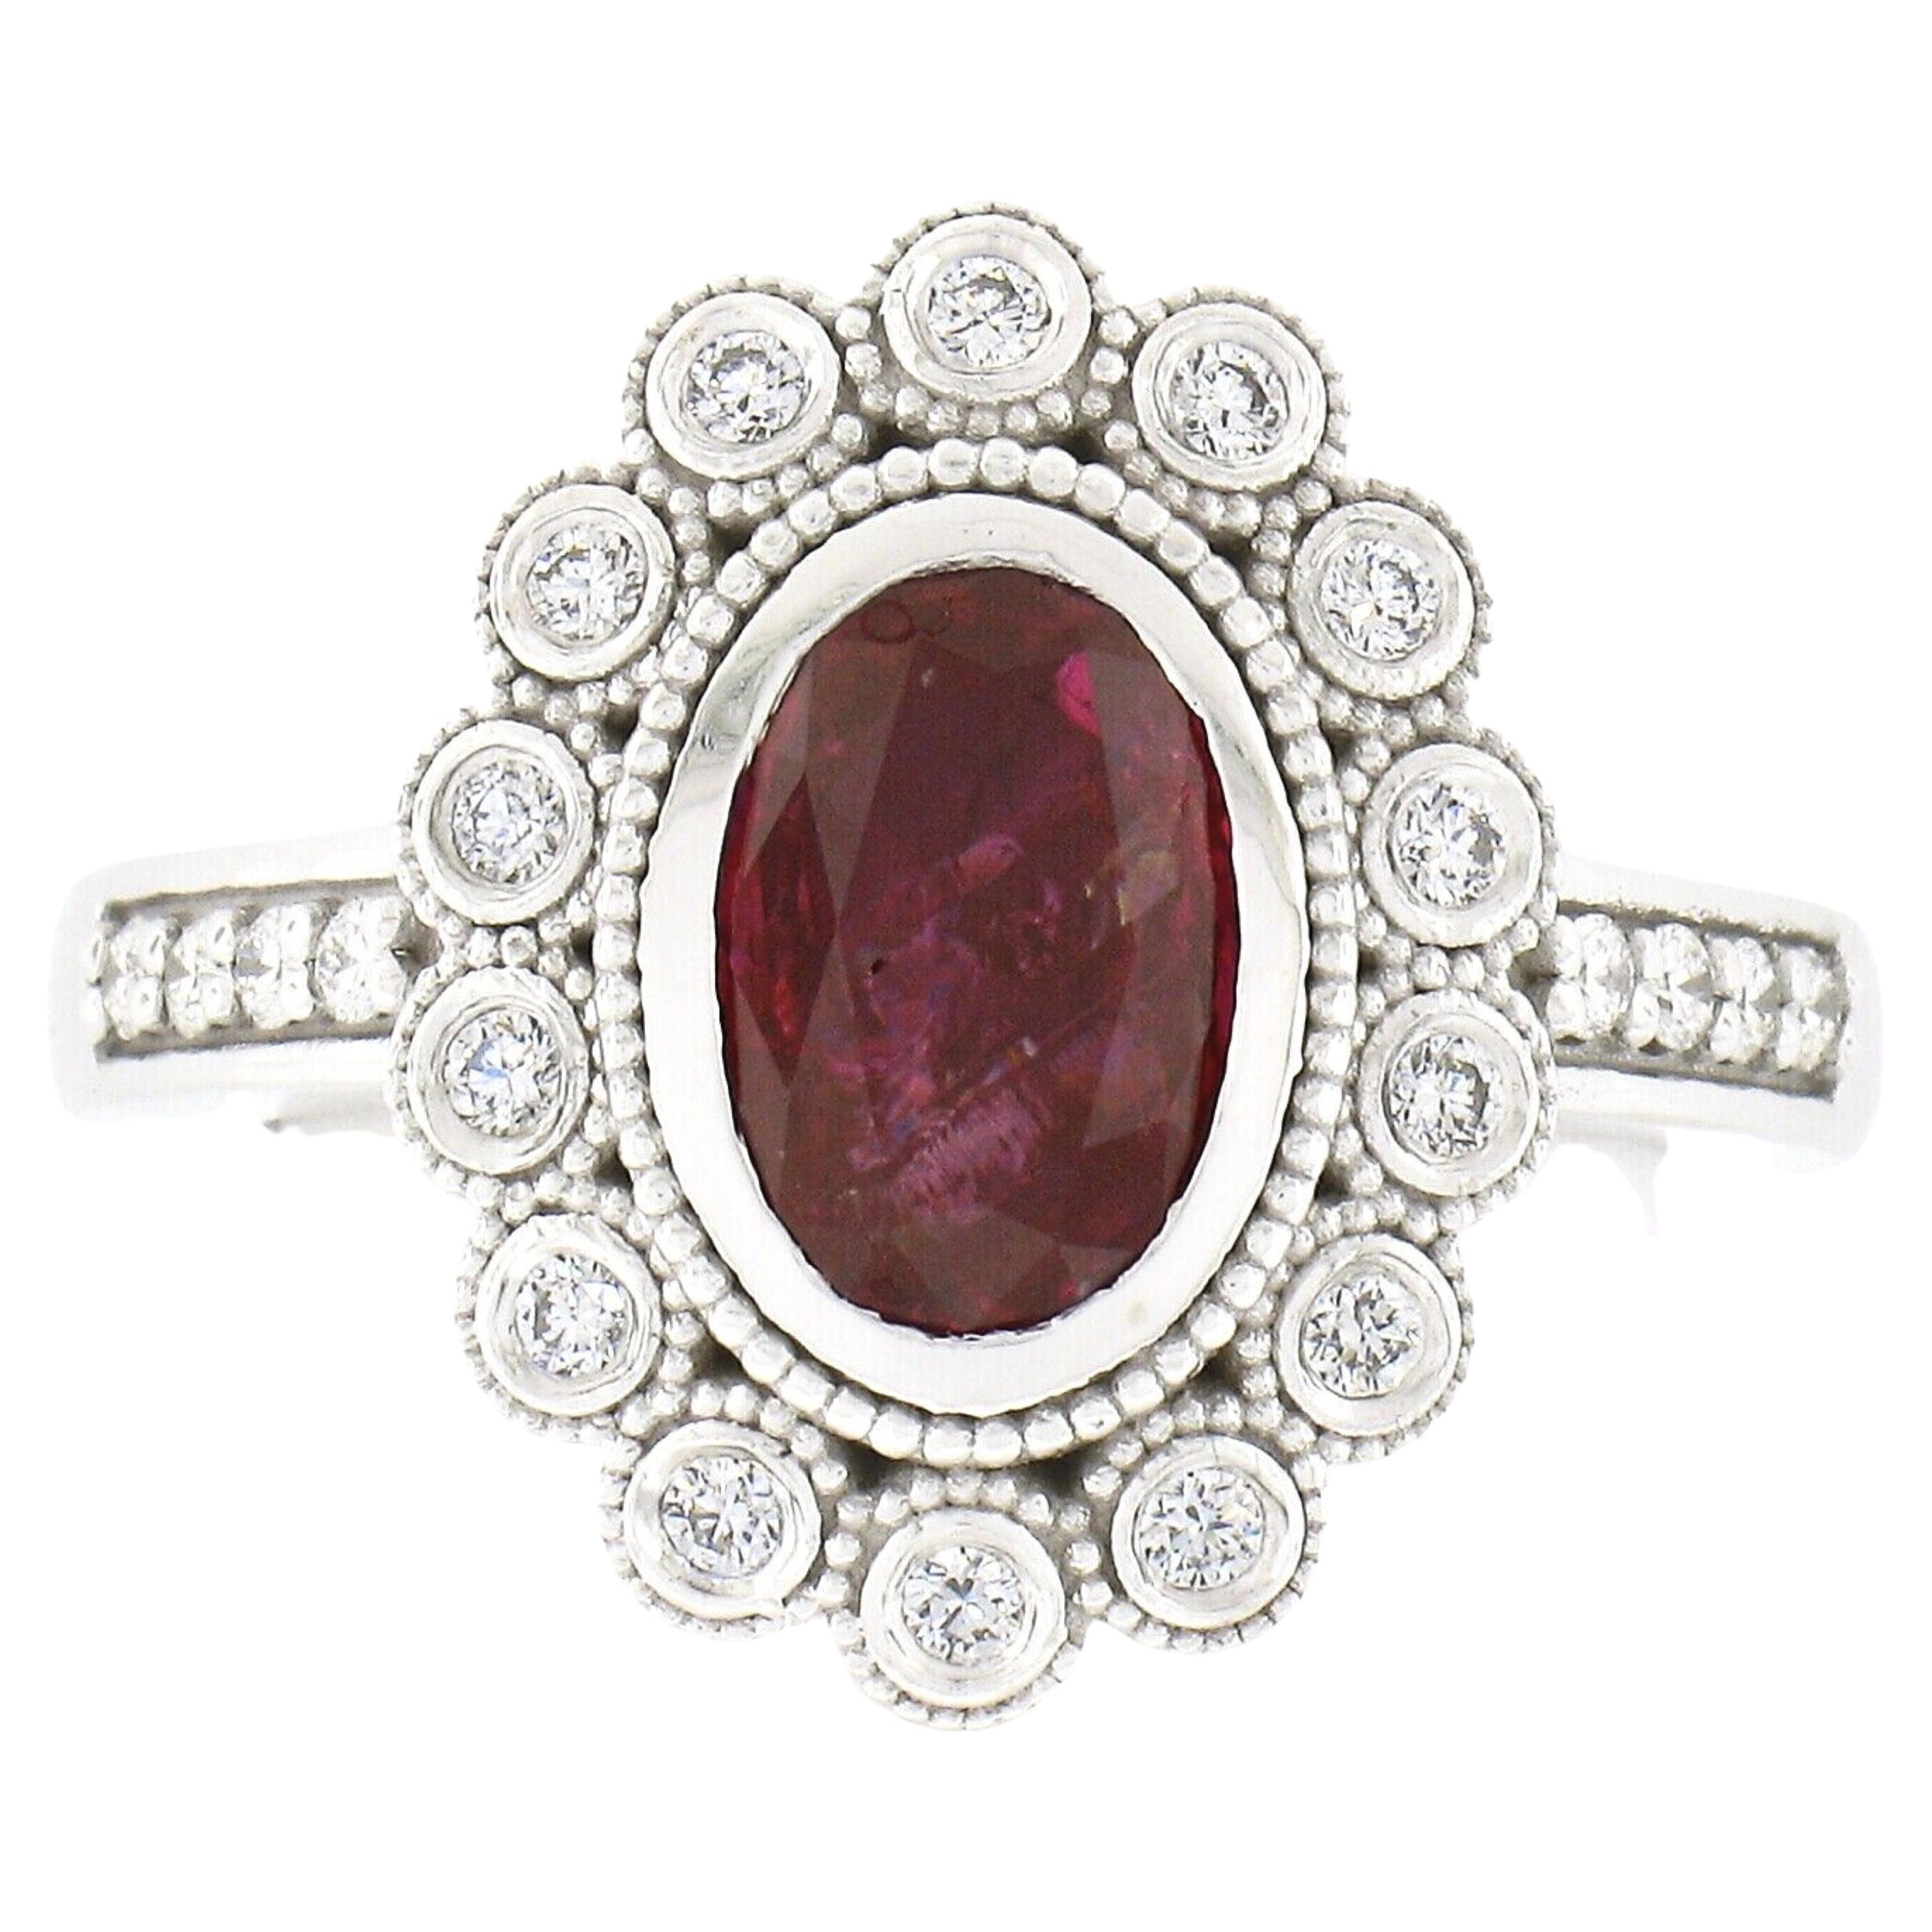 Here we have a brand new and custom designed engagement or right hand ring that is crafted from solid 14k white gold featuring an absolutely stunning ruby with a diamond halo. The GIA certified oval brilliant cut ruby is exactly 2.04 carats and is